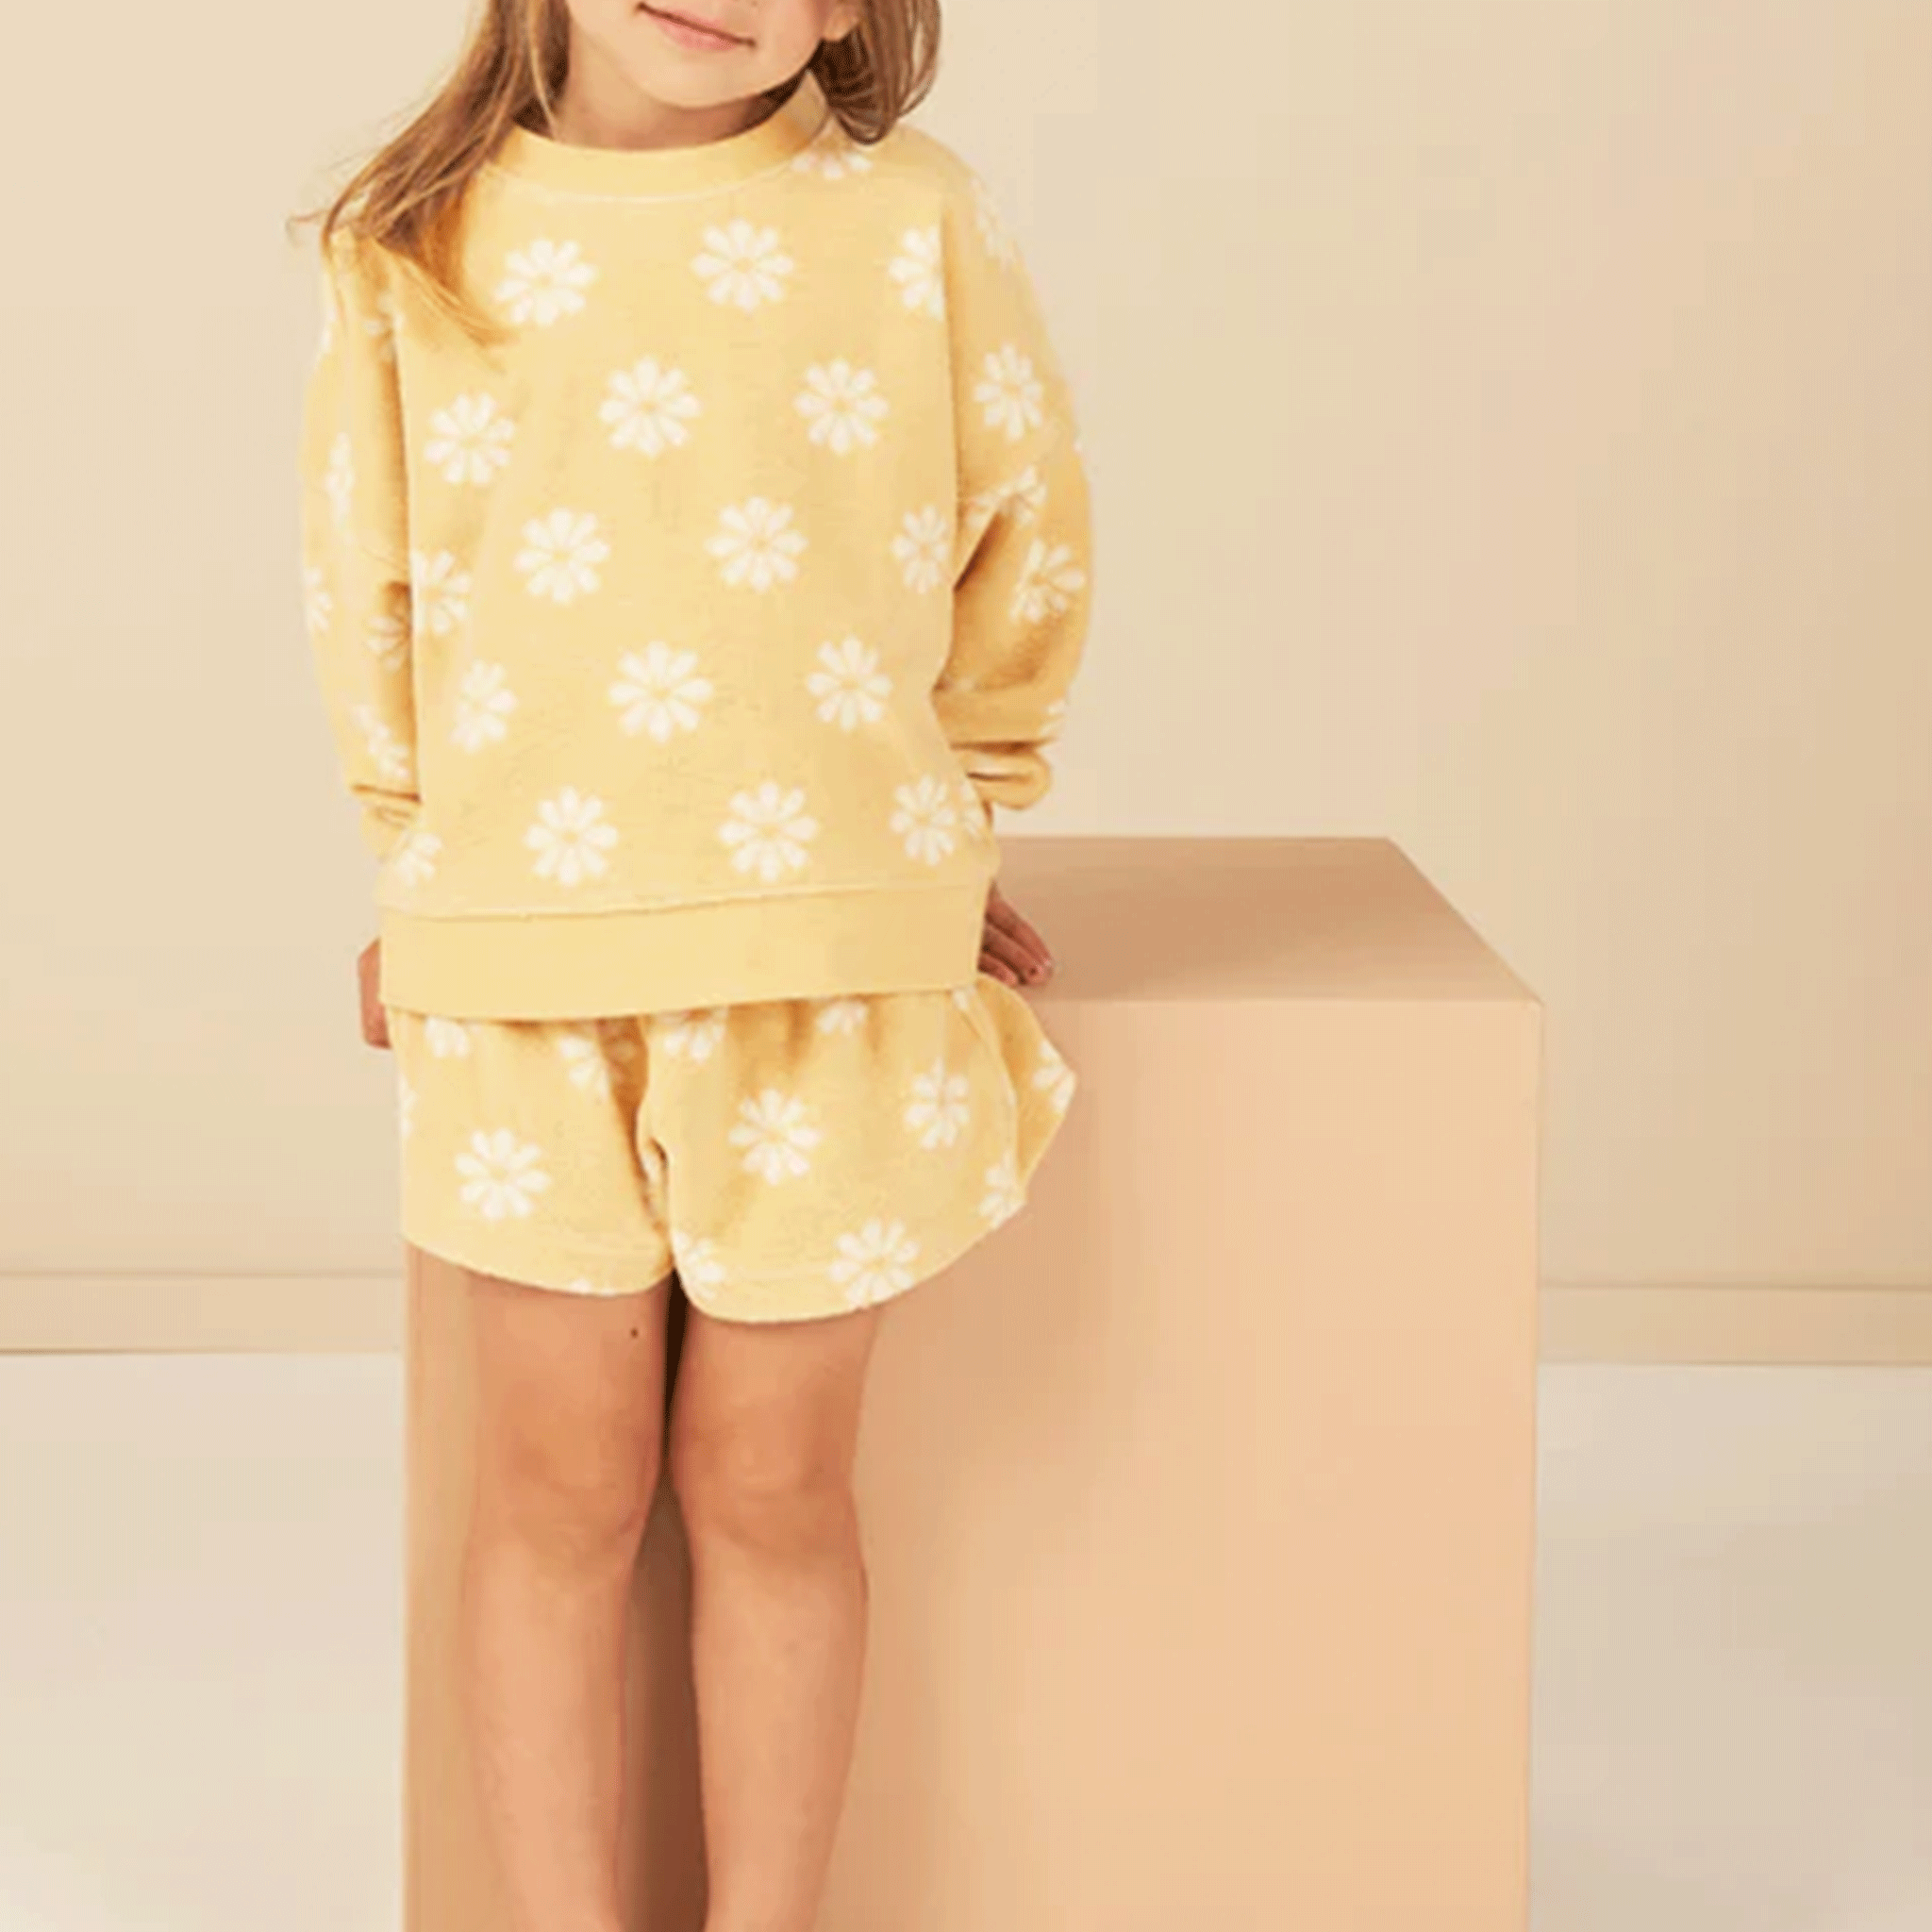 A yellow and white daisy printed pair of shorts. Accessories and pullover not included. 